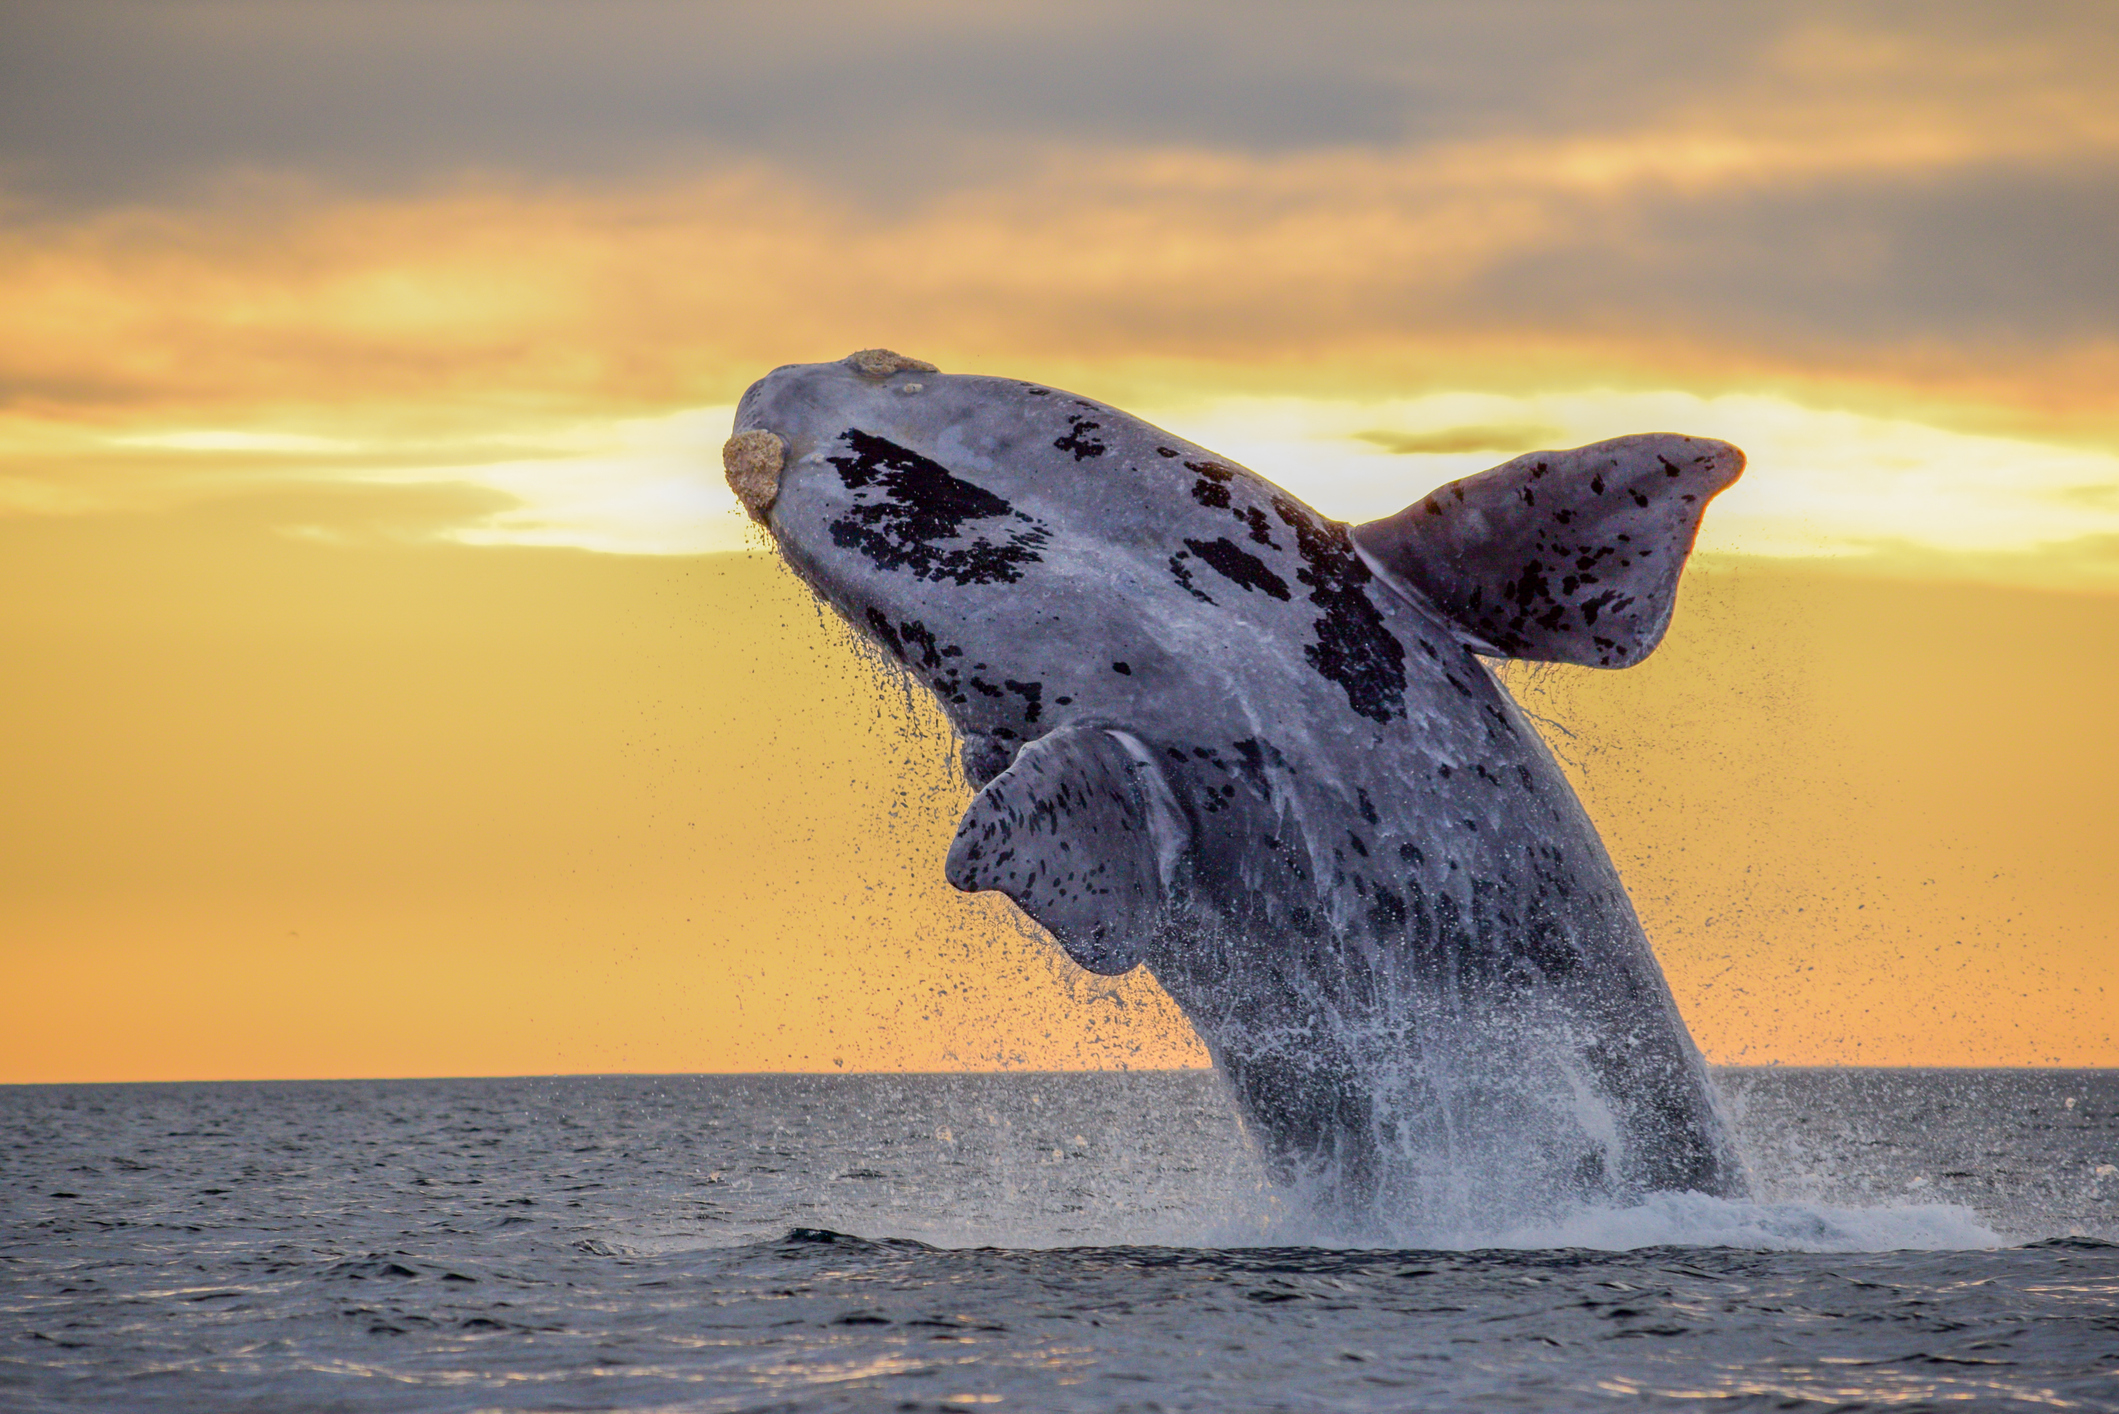 Southern Right Whale jumping out of the water